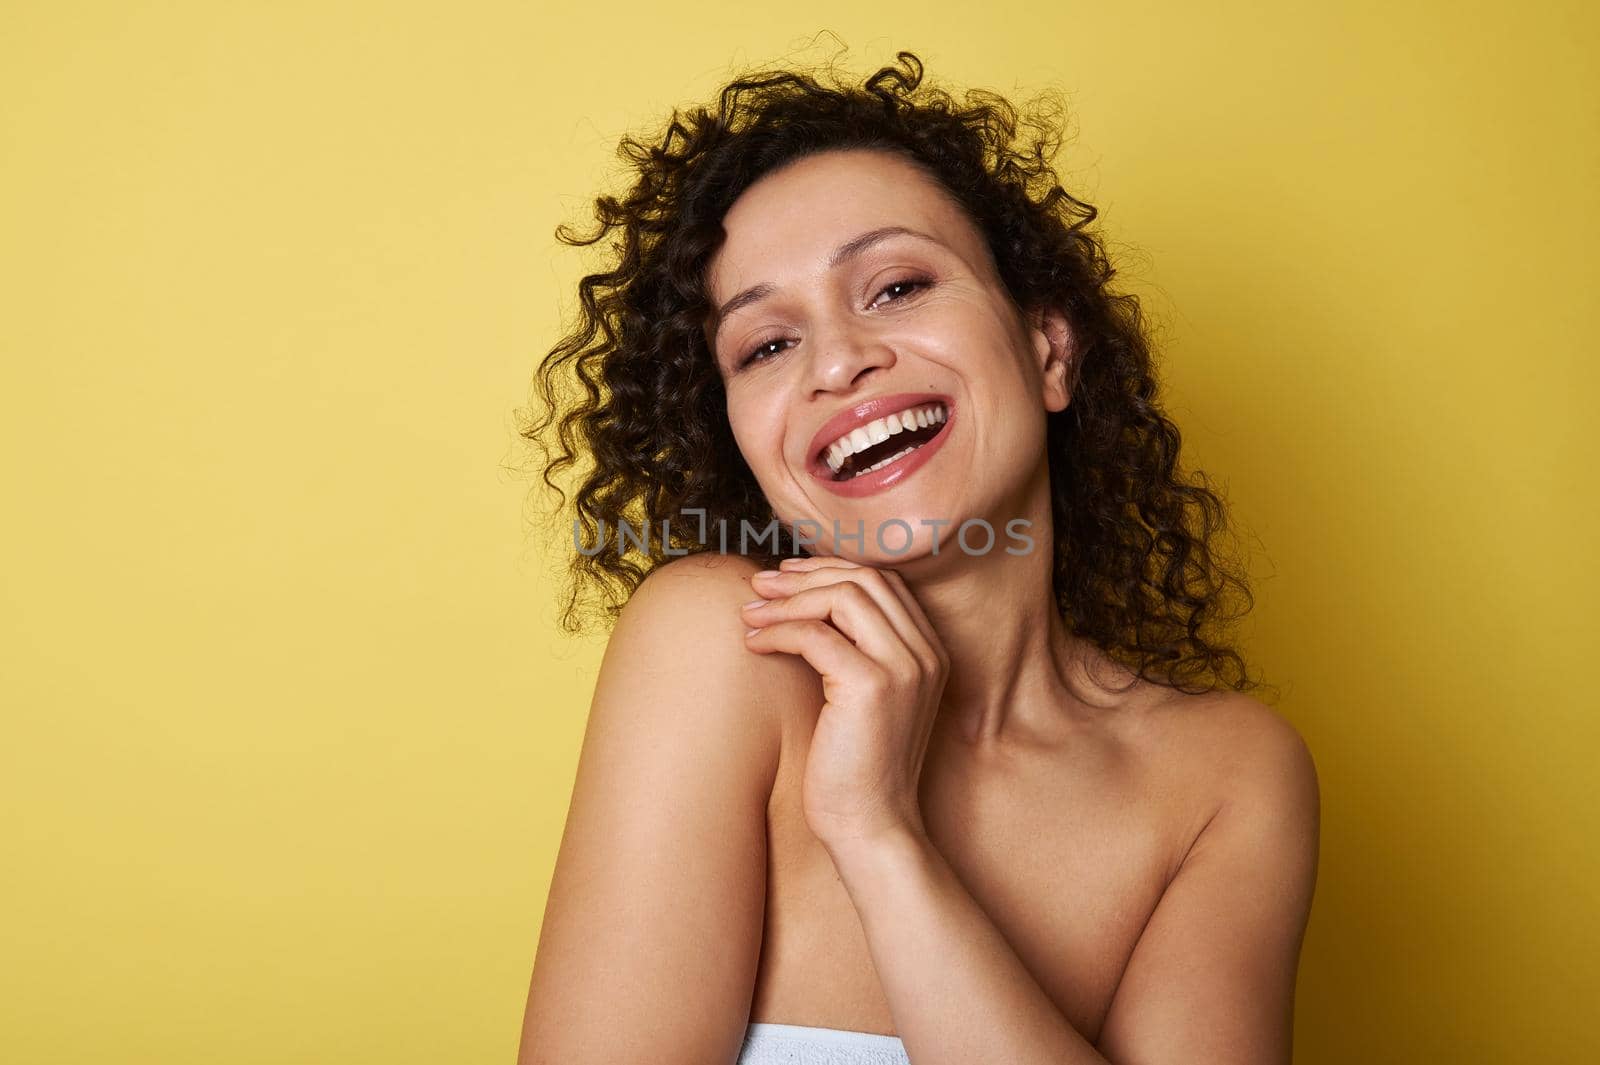 Beauty portrait of young half naked woman with curly hair smiling toothy smile looking at camera, posing over yellow background with copy space